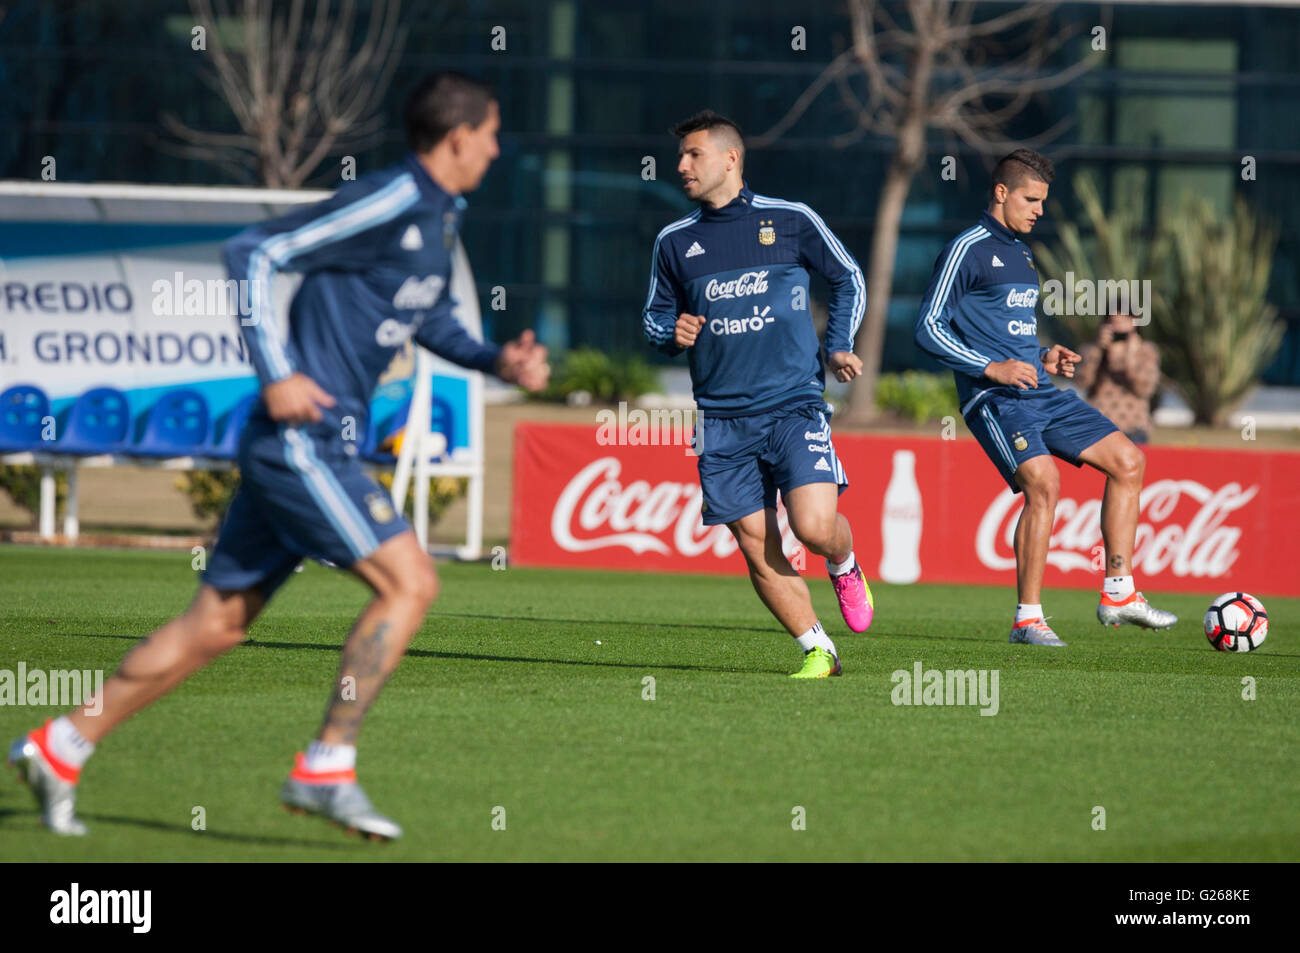 Ezeiza, Argentina. 24th May, 2016. Angel Di Maria (L), Sergio Aguero (C)and Erik Lamela (R), players of Argentina national soccer team, participate in a training session in the complex of the Argentina football Association (AFA), Ezeiza city, 32 km from Buenos Aires, capital of Argentina, on May 24, 2016. Argentina soccer team conducted their training before the friendly match against Honduras to be held on May 27. © Martin Zabala/Xinhua/Alamy Live News Stock Photo